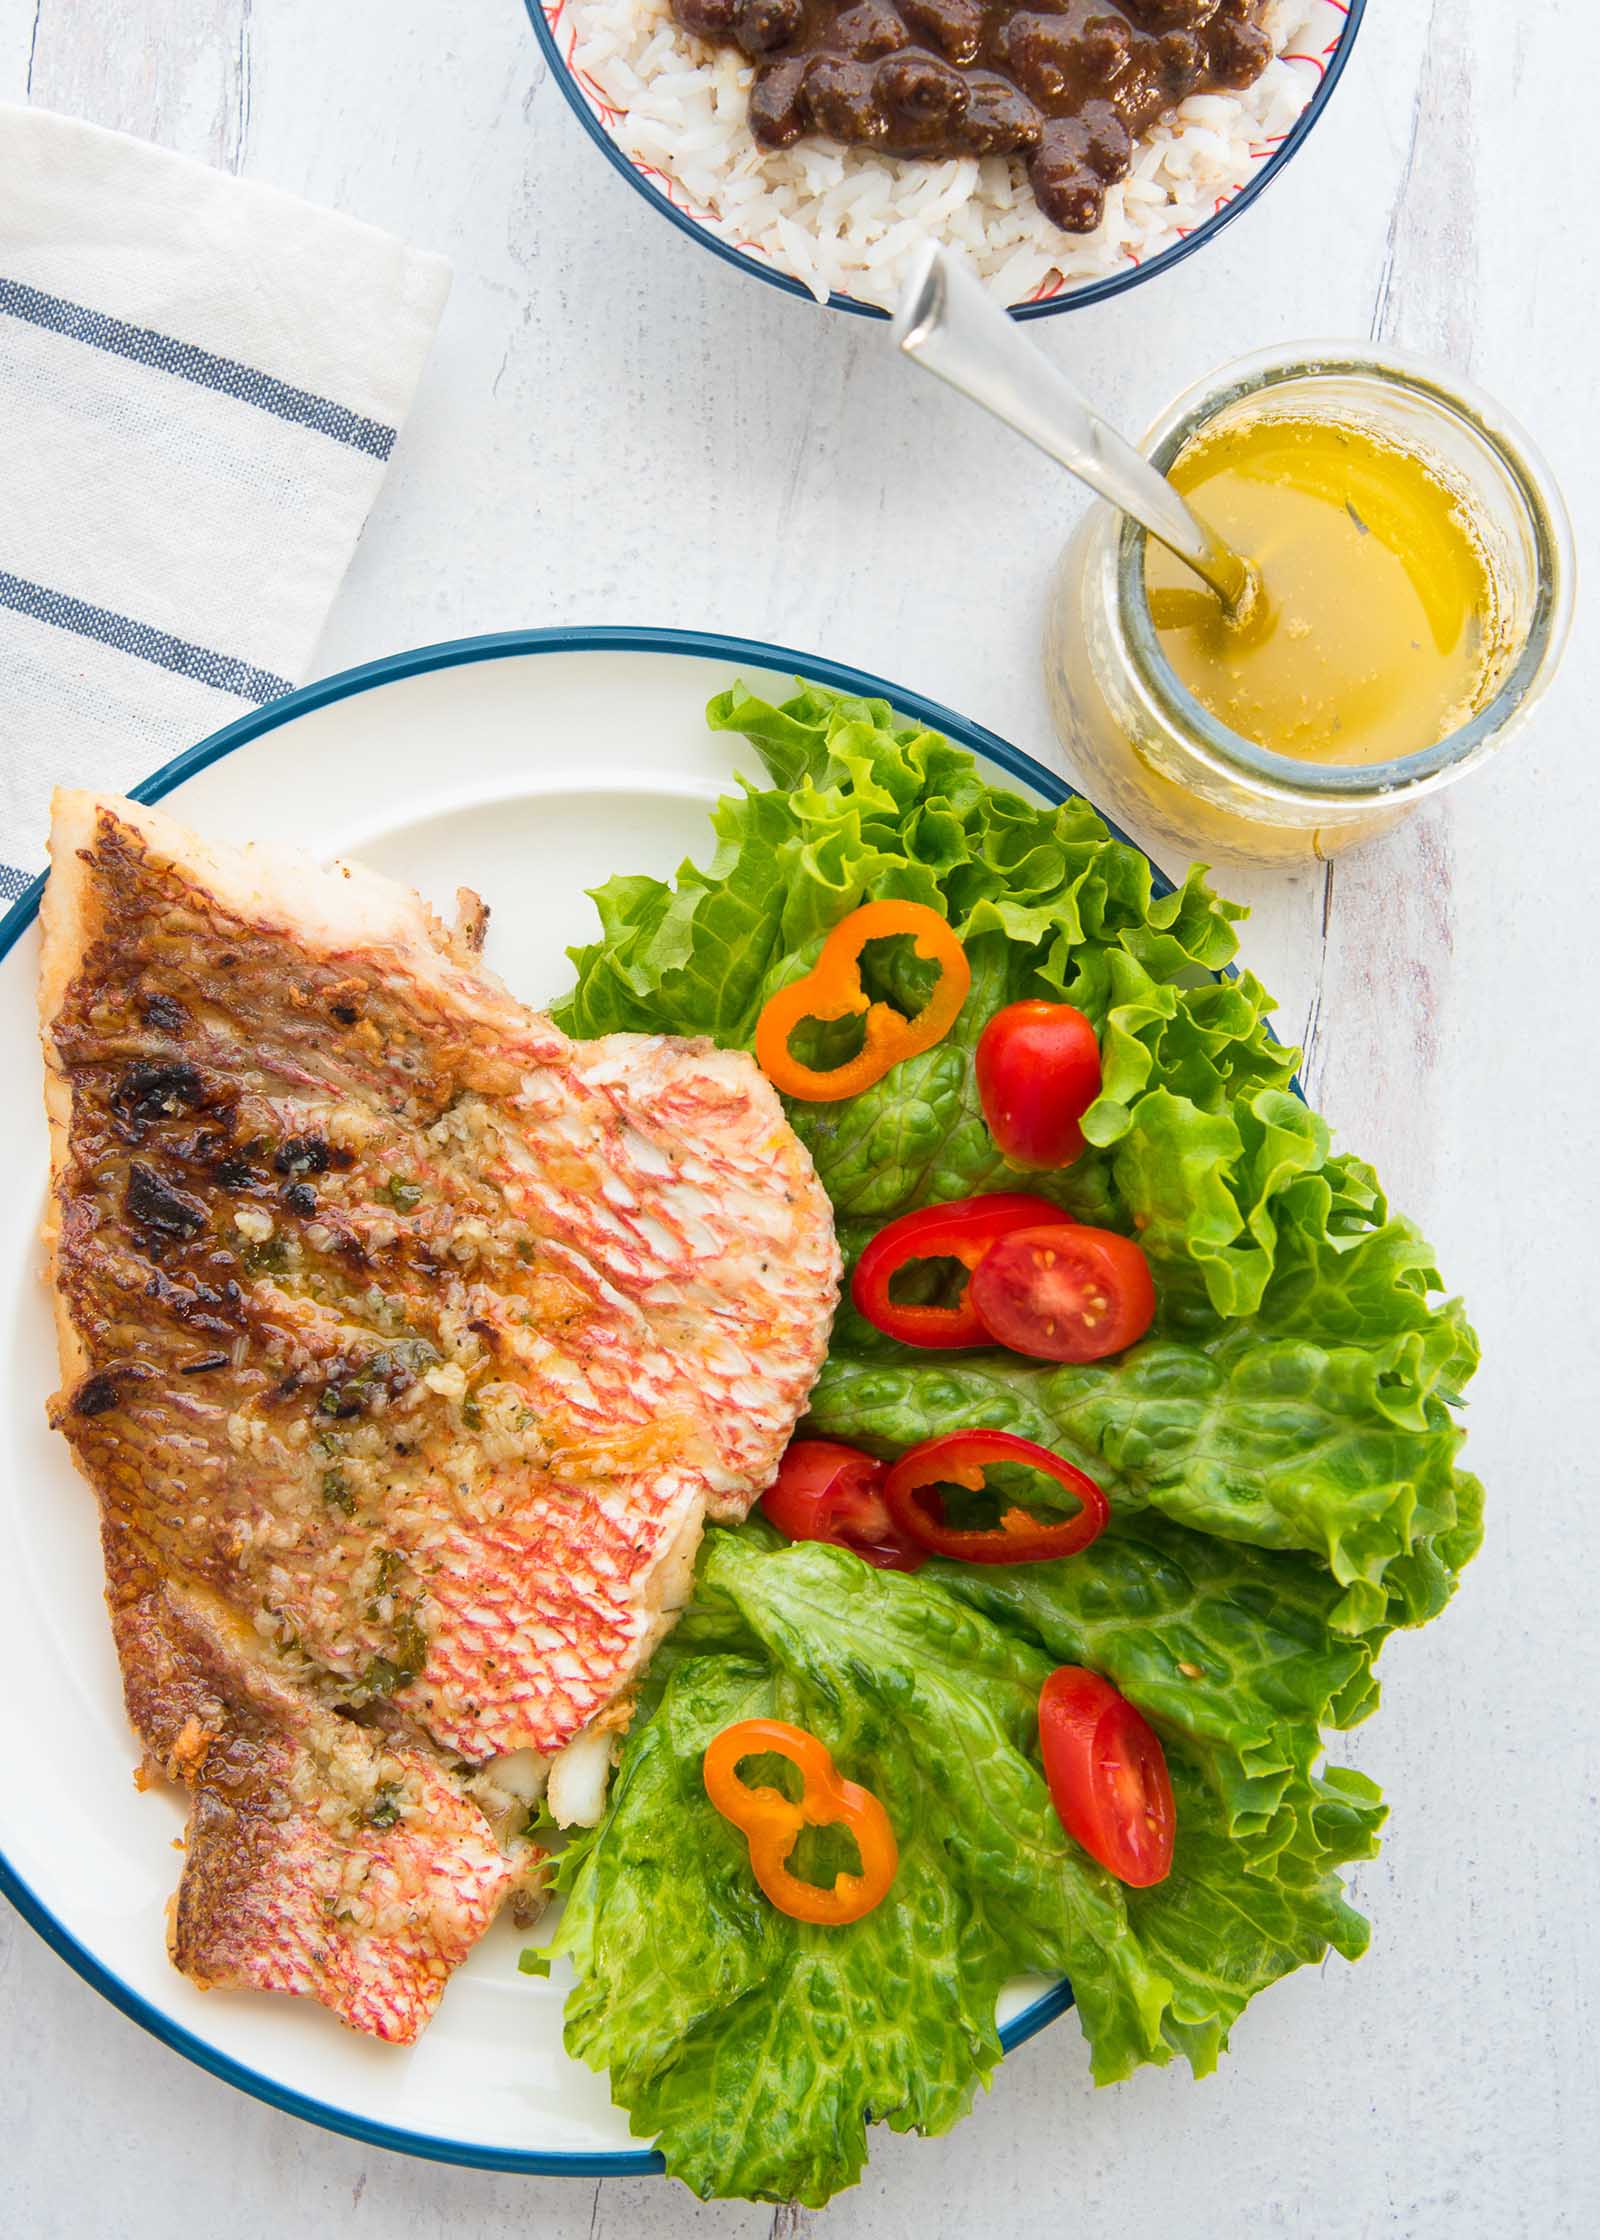 Red snapper with garlic sauce is on a white plate with a blue stripe around the edge. The snapper is crispy and takes up half of the plate. A green leafy salad with red and orange peppers is on the other side of the plate. A jar of garlic sauce is to the upper right of the salad. A bowl of rice and beans with cilantro is to the upper left of the jar of sauce. A striped napkin are to the left of the snapper.